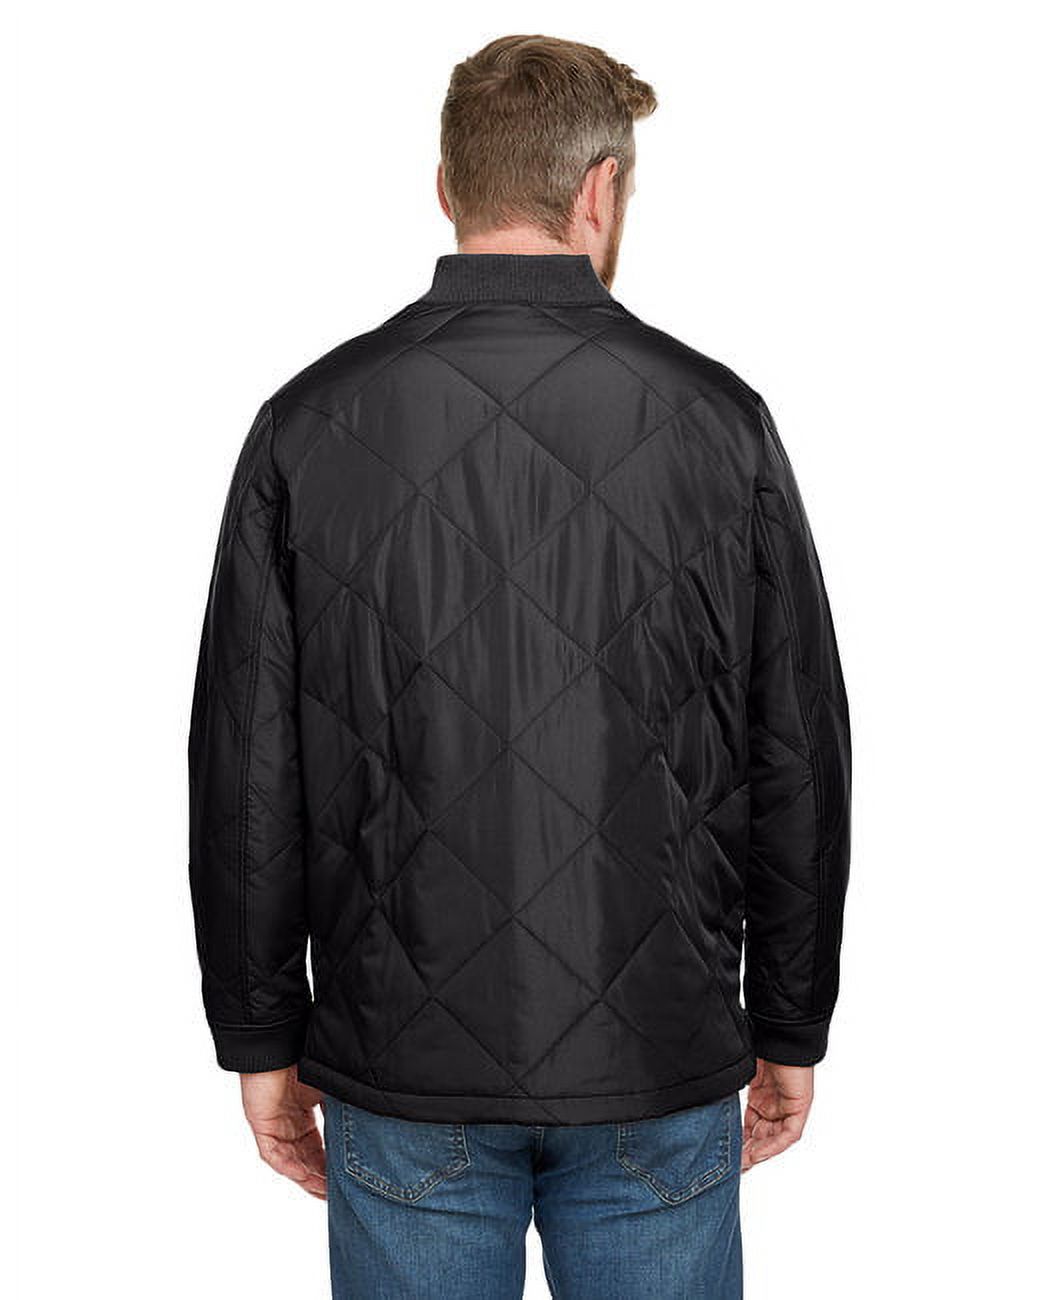 Adult Dockside Insulated Utility Jacket - DARK CHARCOAL - M - image 2 of 3